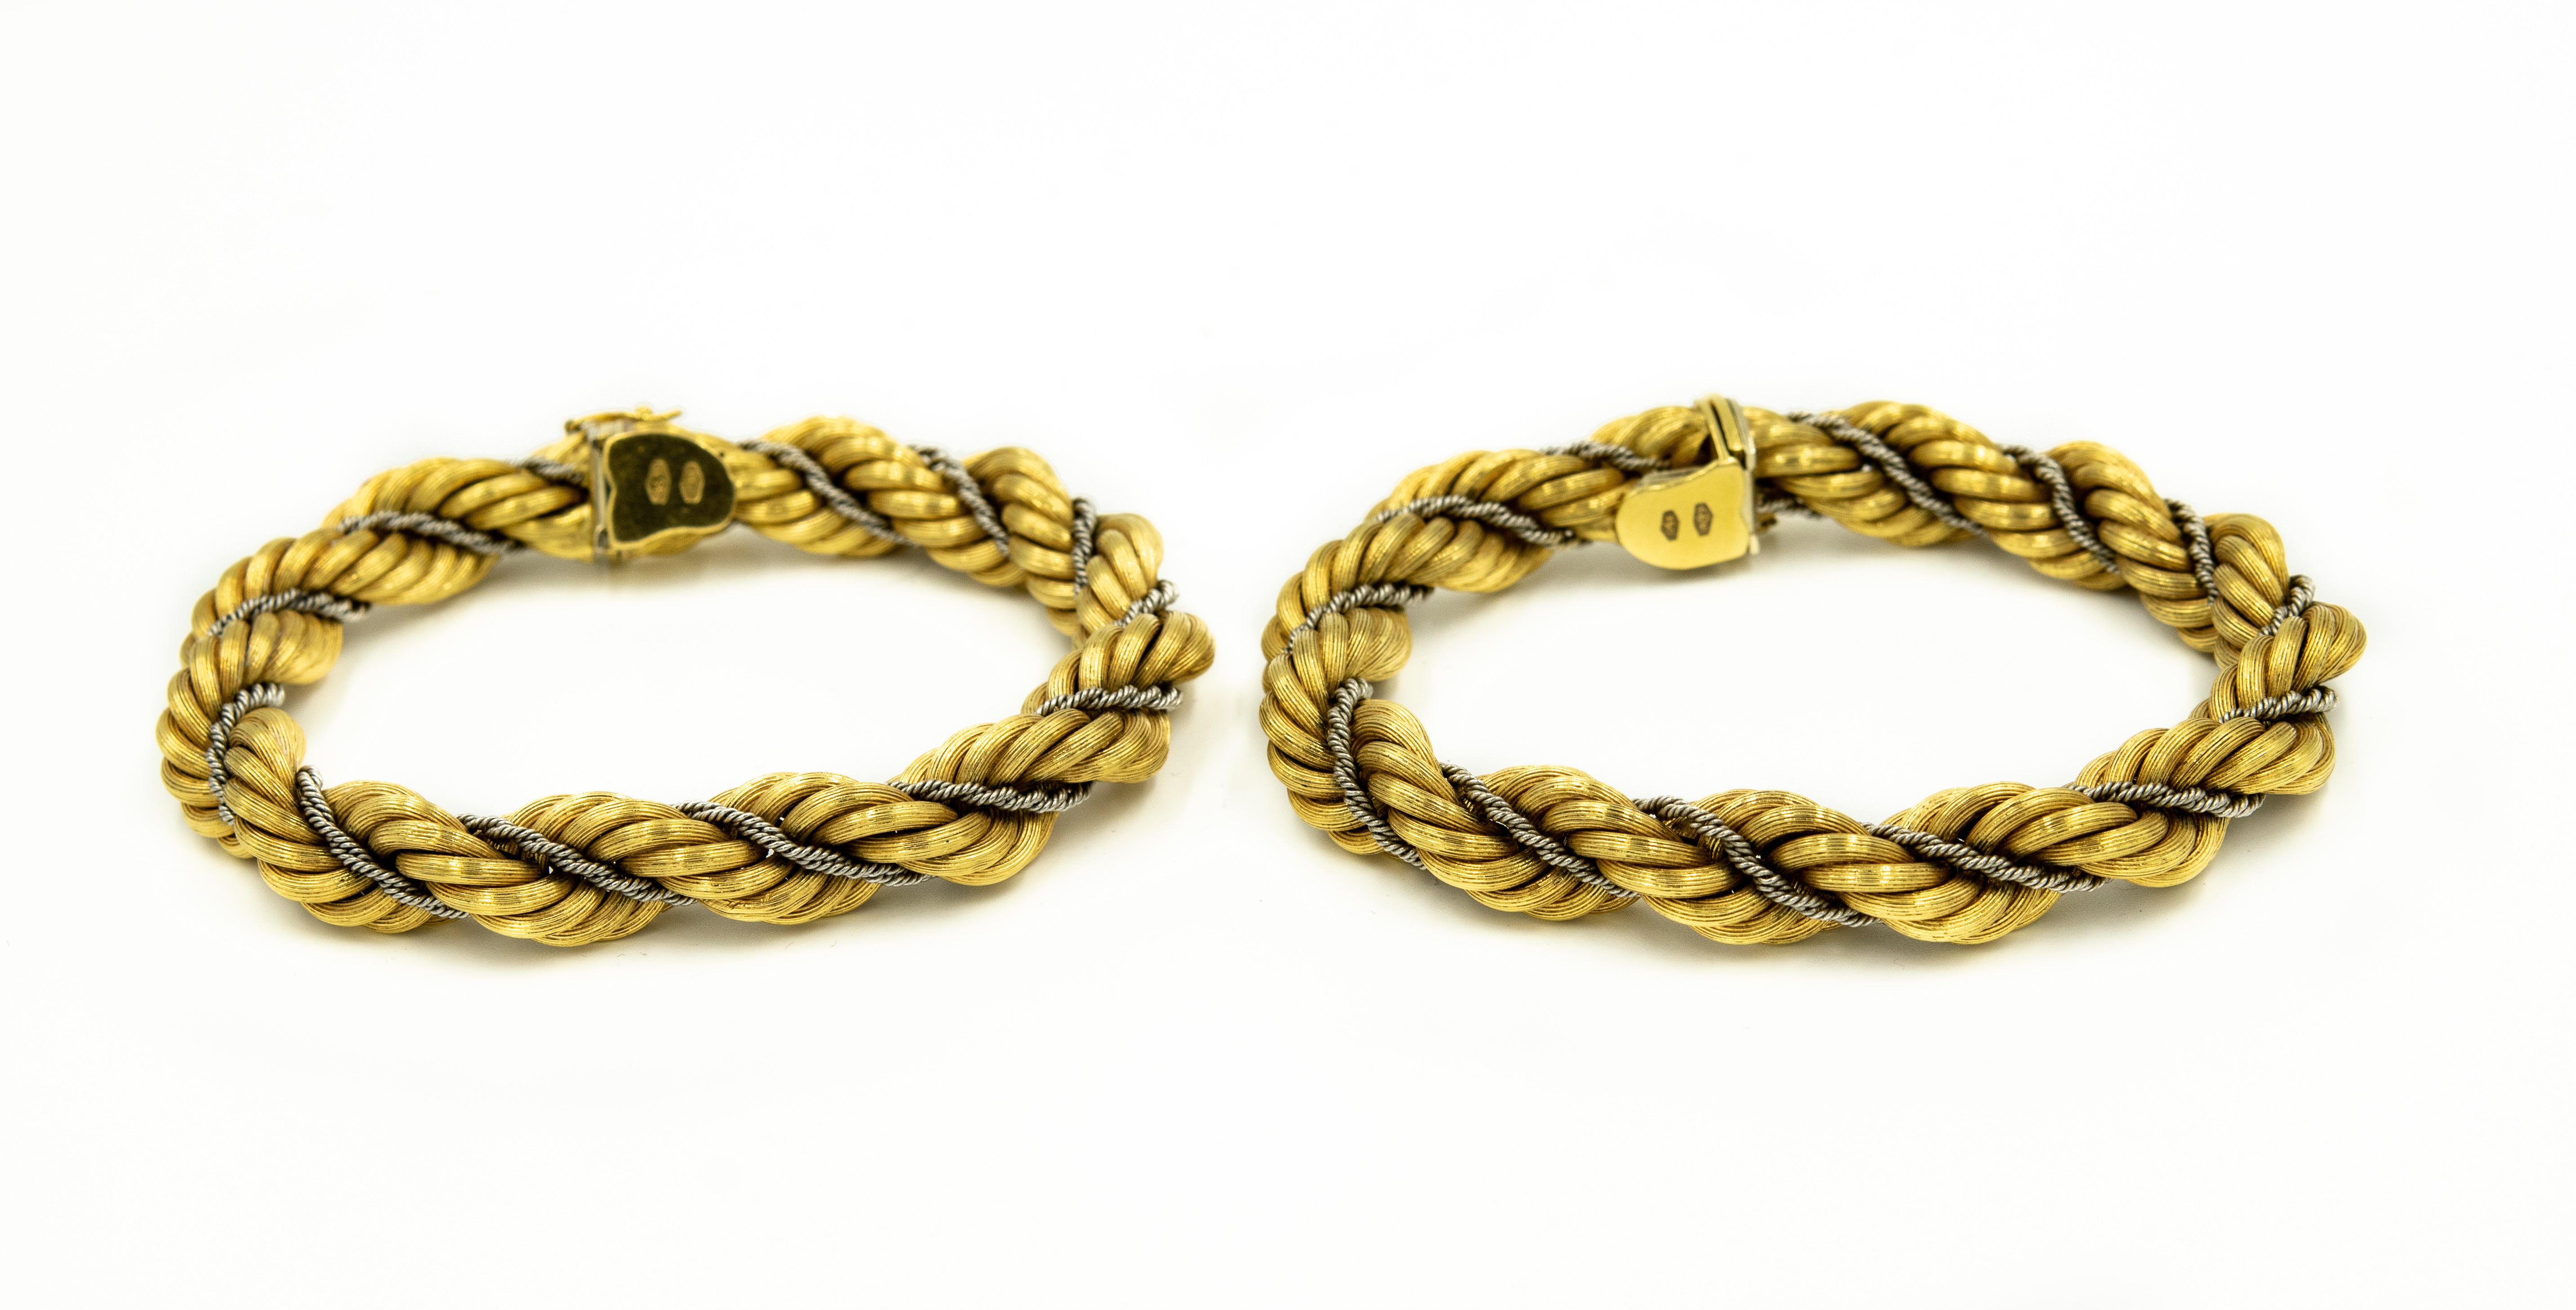 Nicolis Cola Italian Twisted White and Yellow Gold Rope 2 Bracelets or Necklace